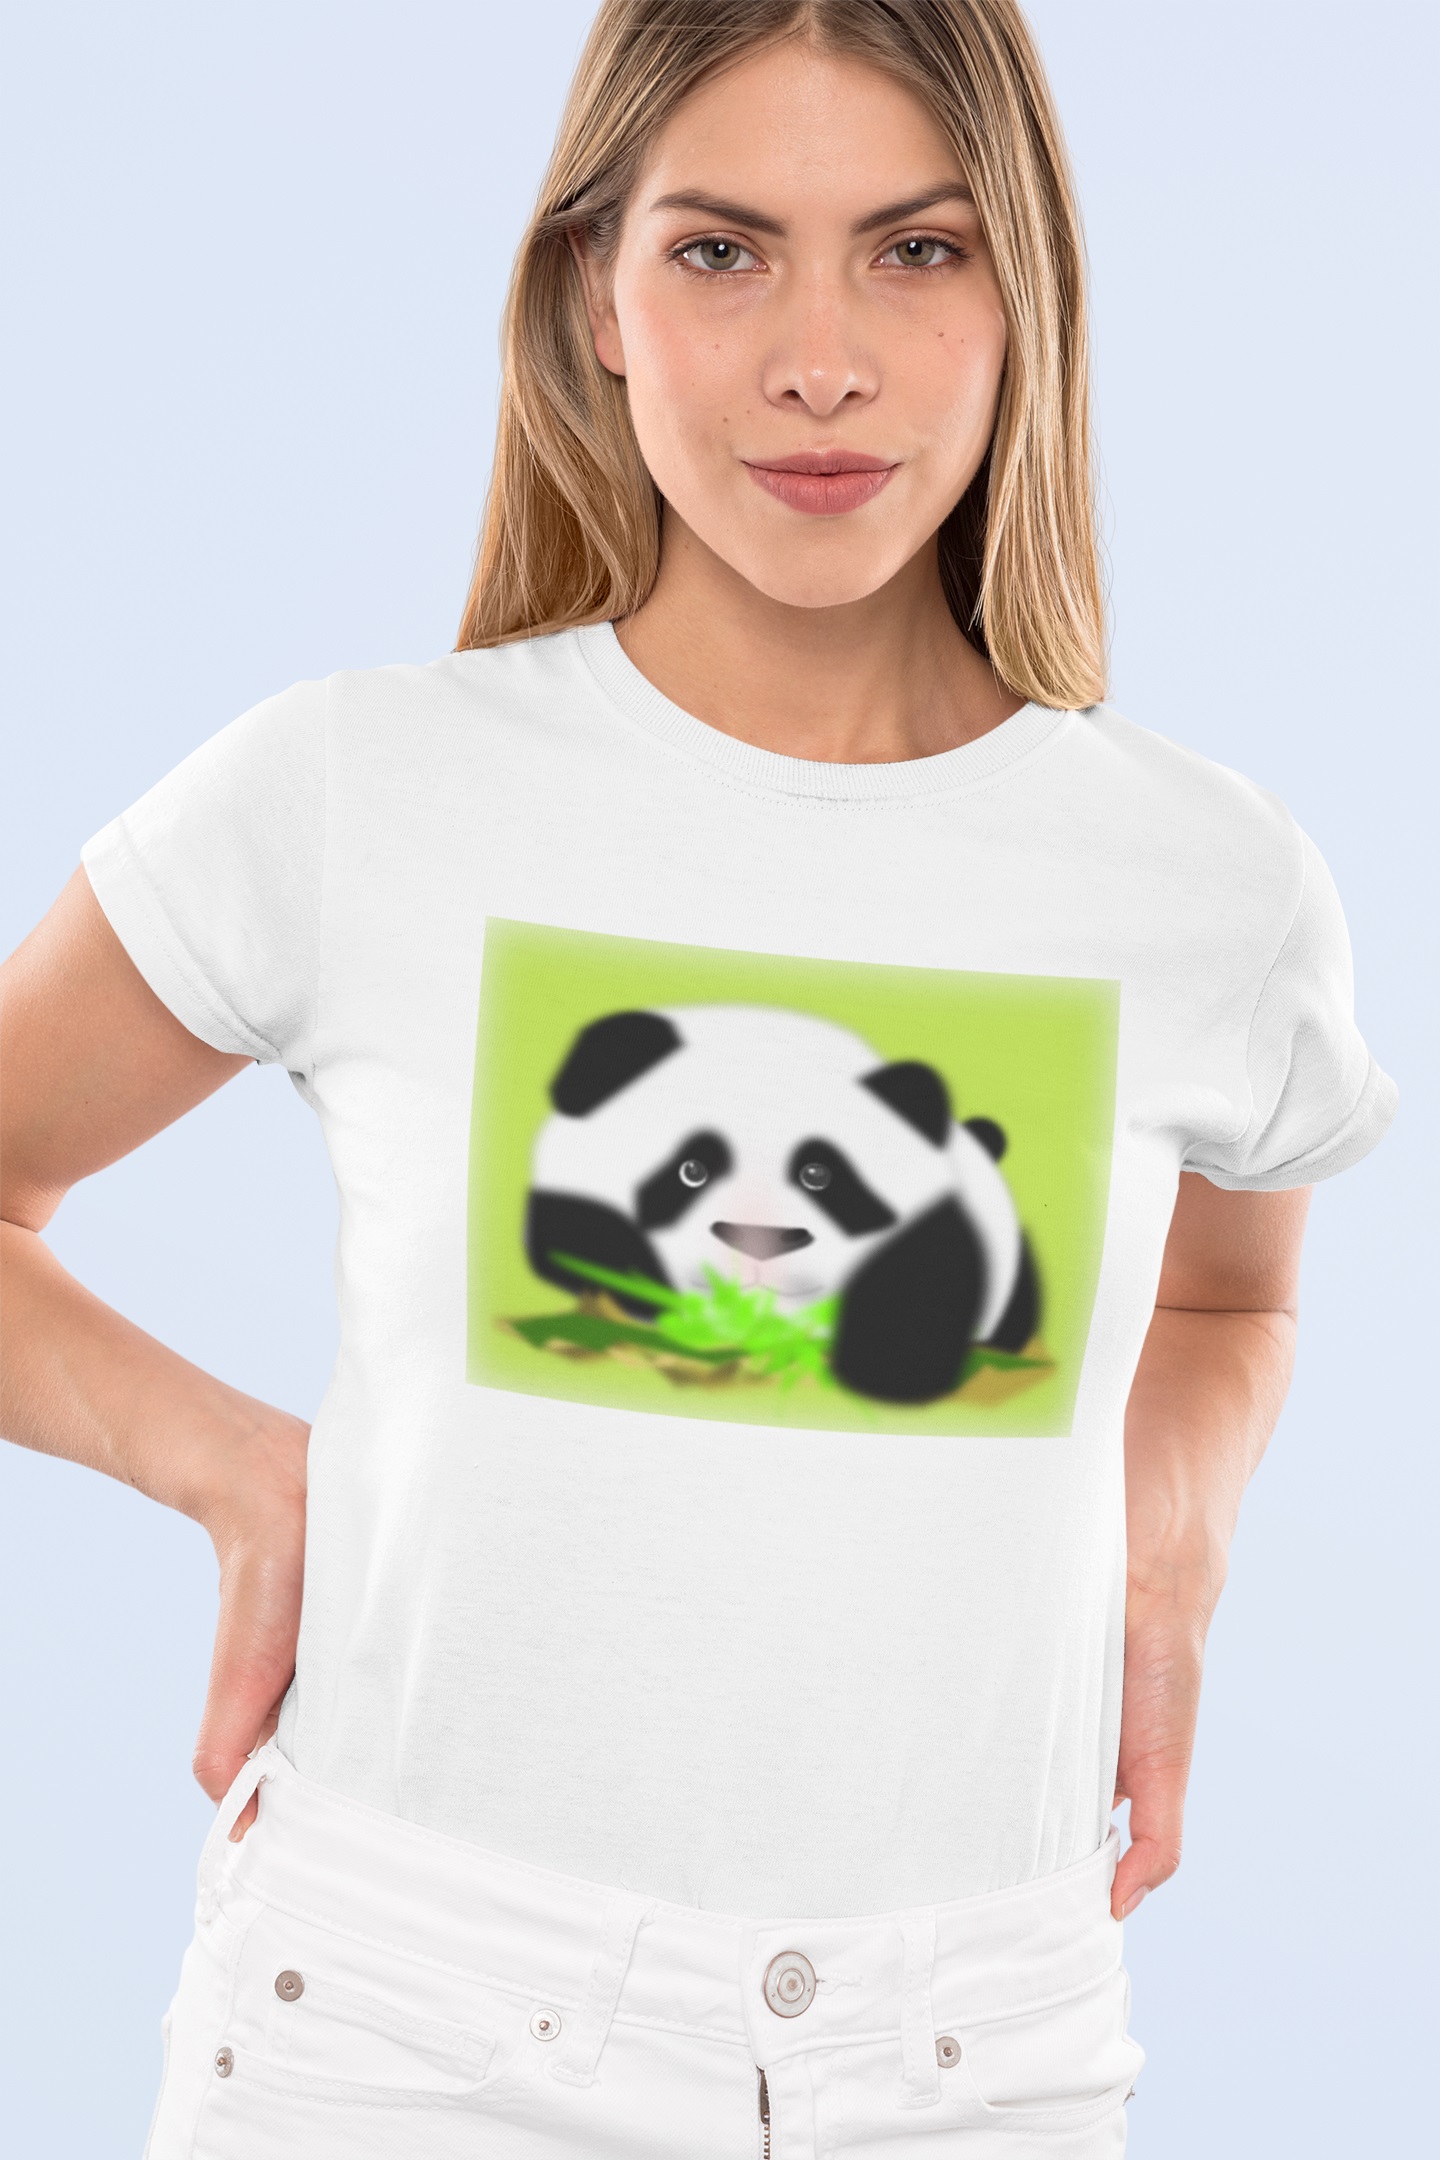 Woman wearing white tee with full color panda graphic on front